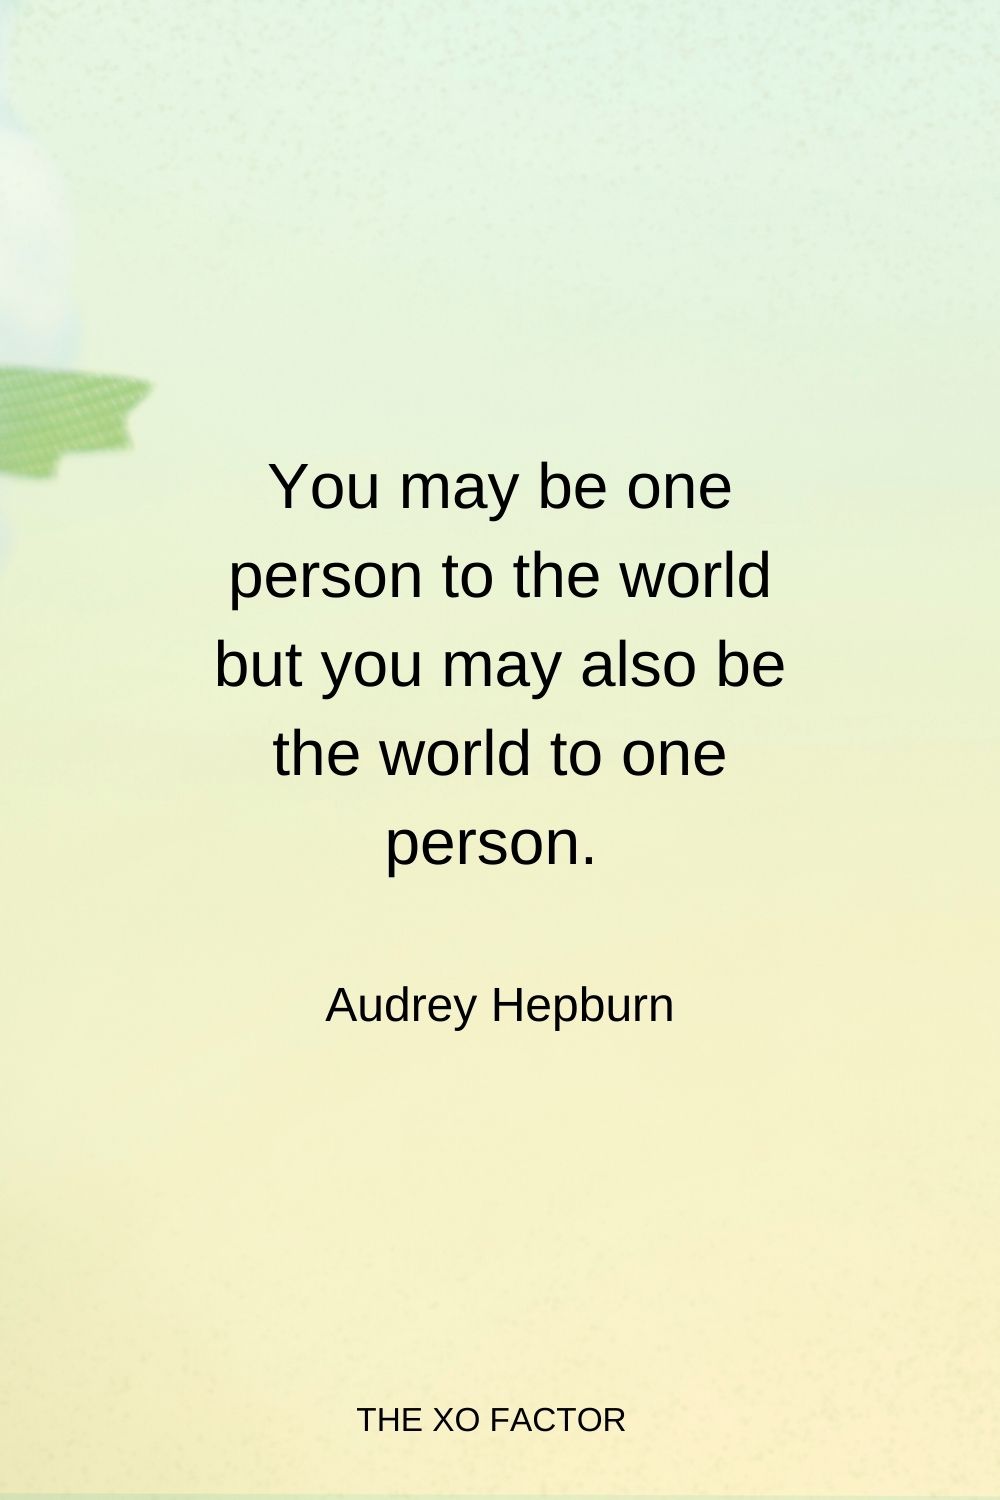 You may be one person to the world but you may also be the world to one person.  Audrey Hepburn